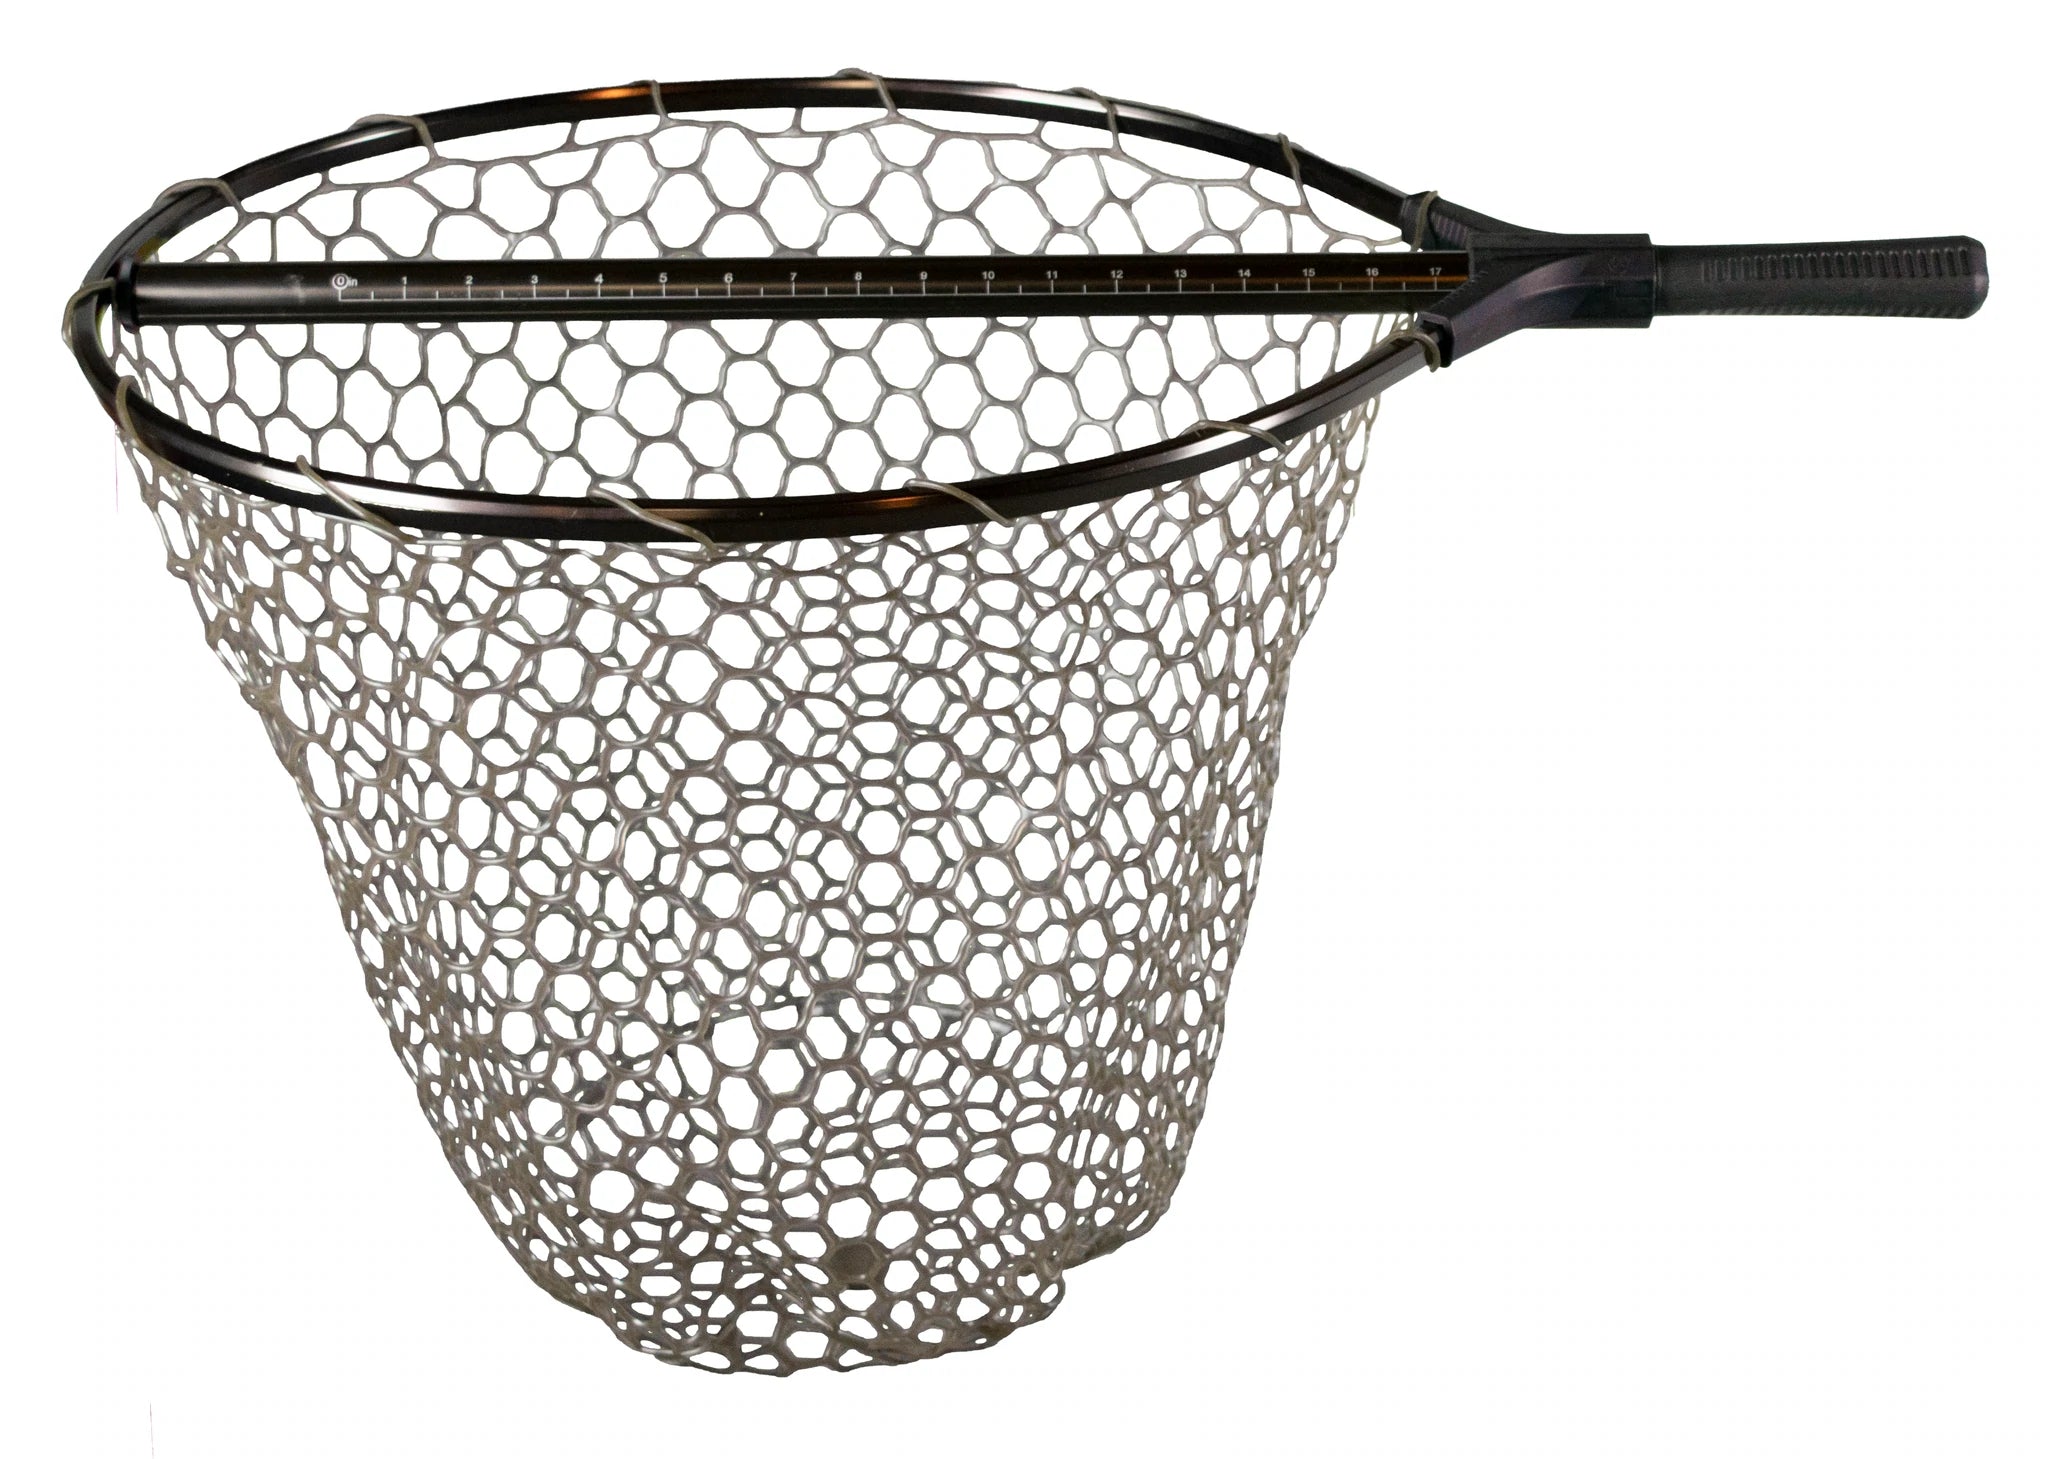 Adamsbuilt Aluminum 22 Inch Boat Net with Ghost Netting